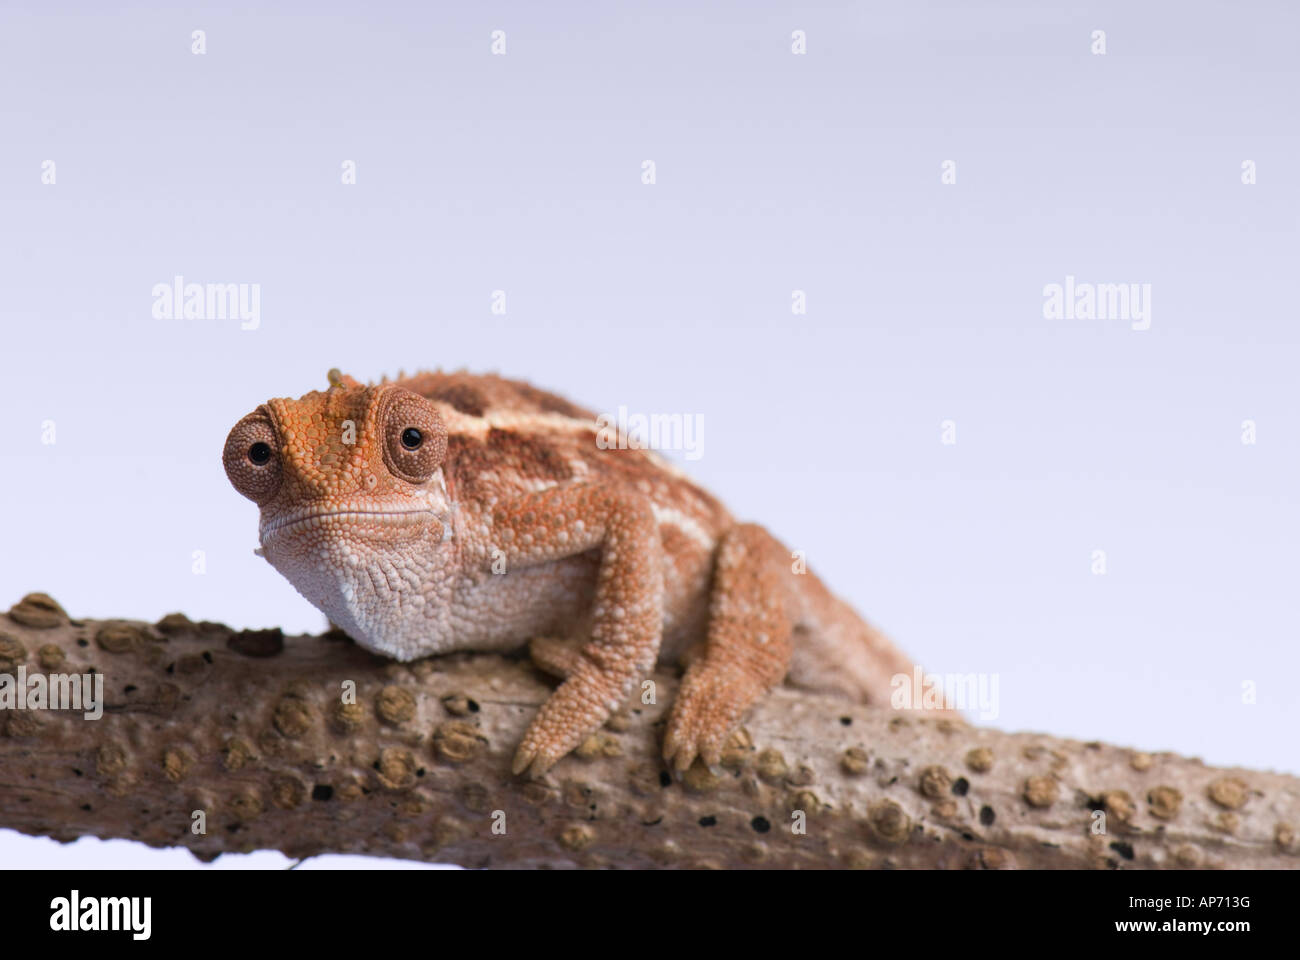 Young chameleon on branch looking straight at camera Stock Photo